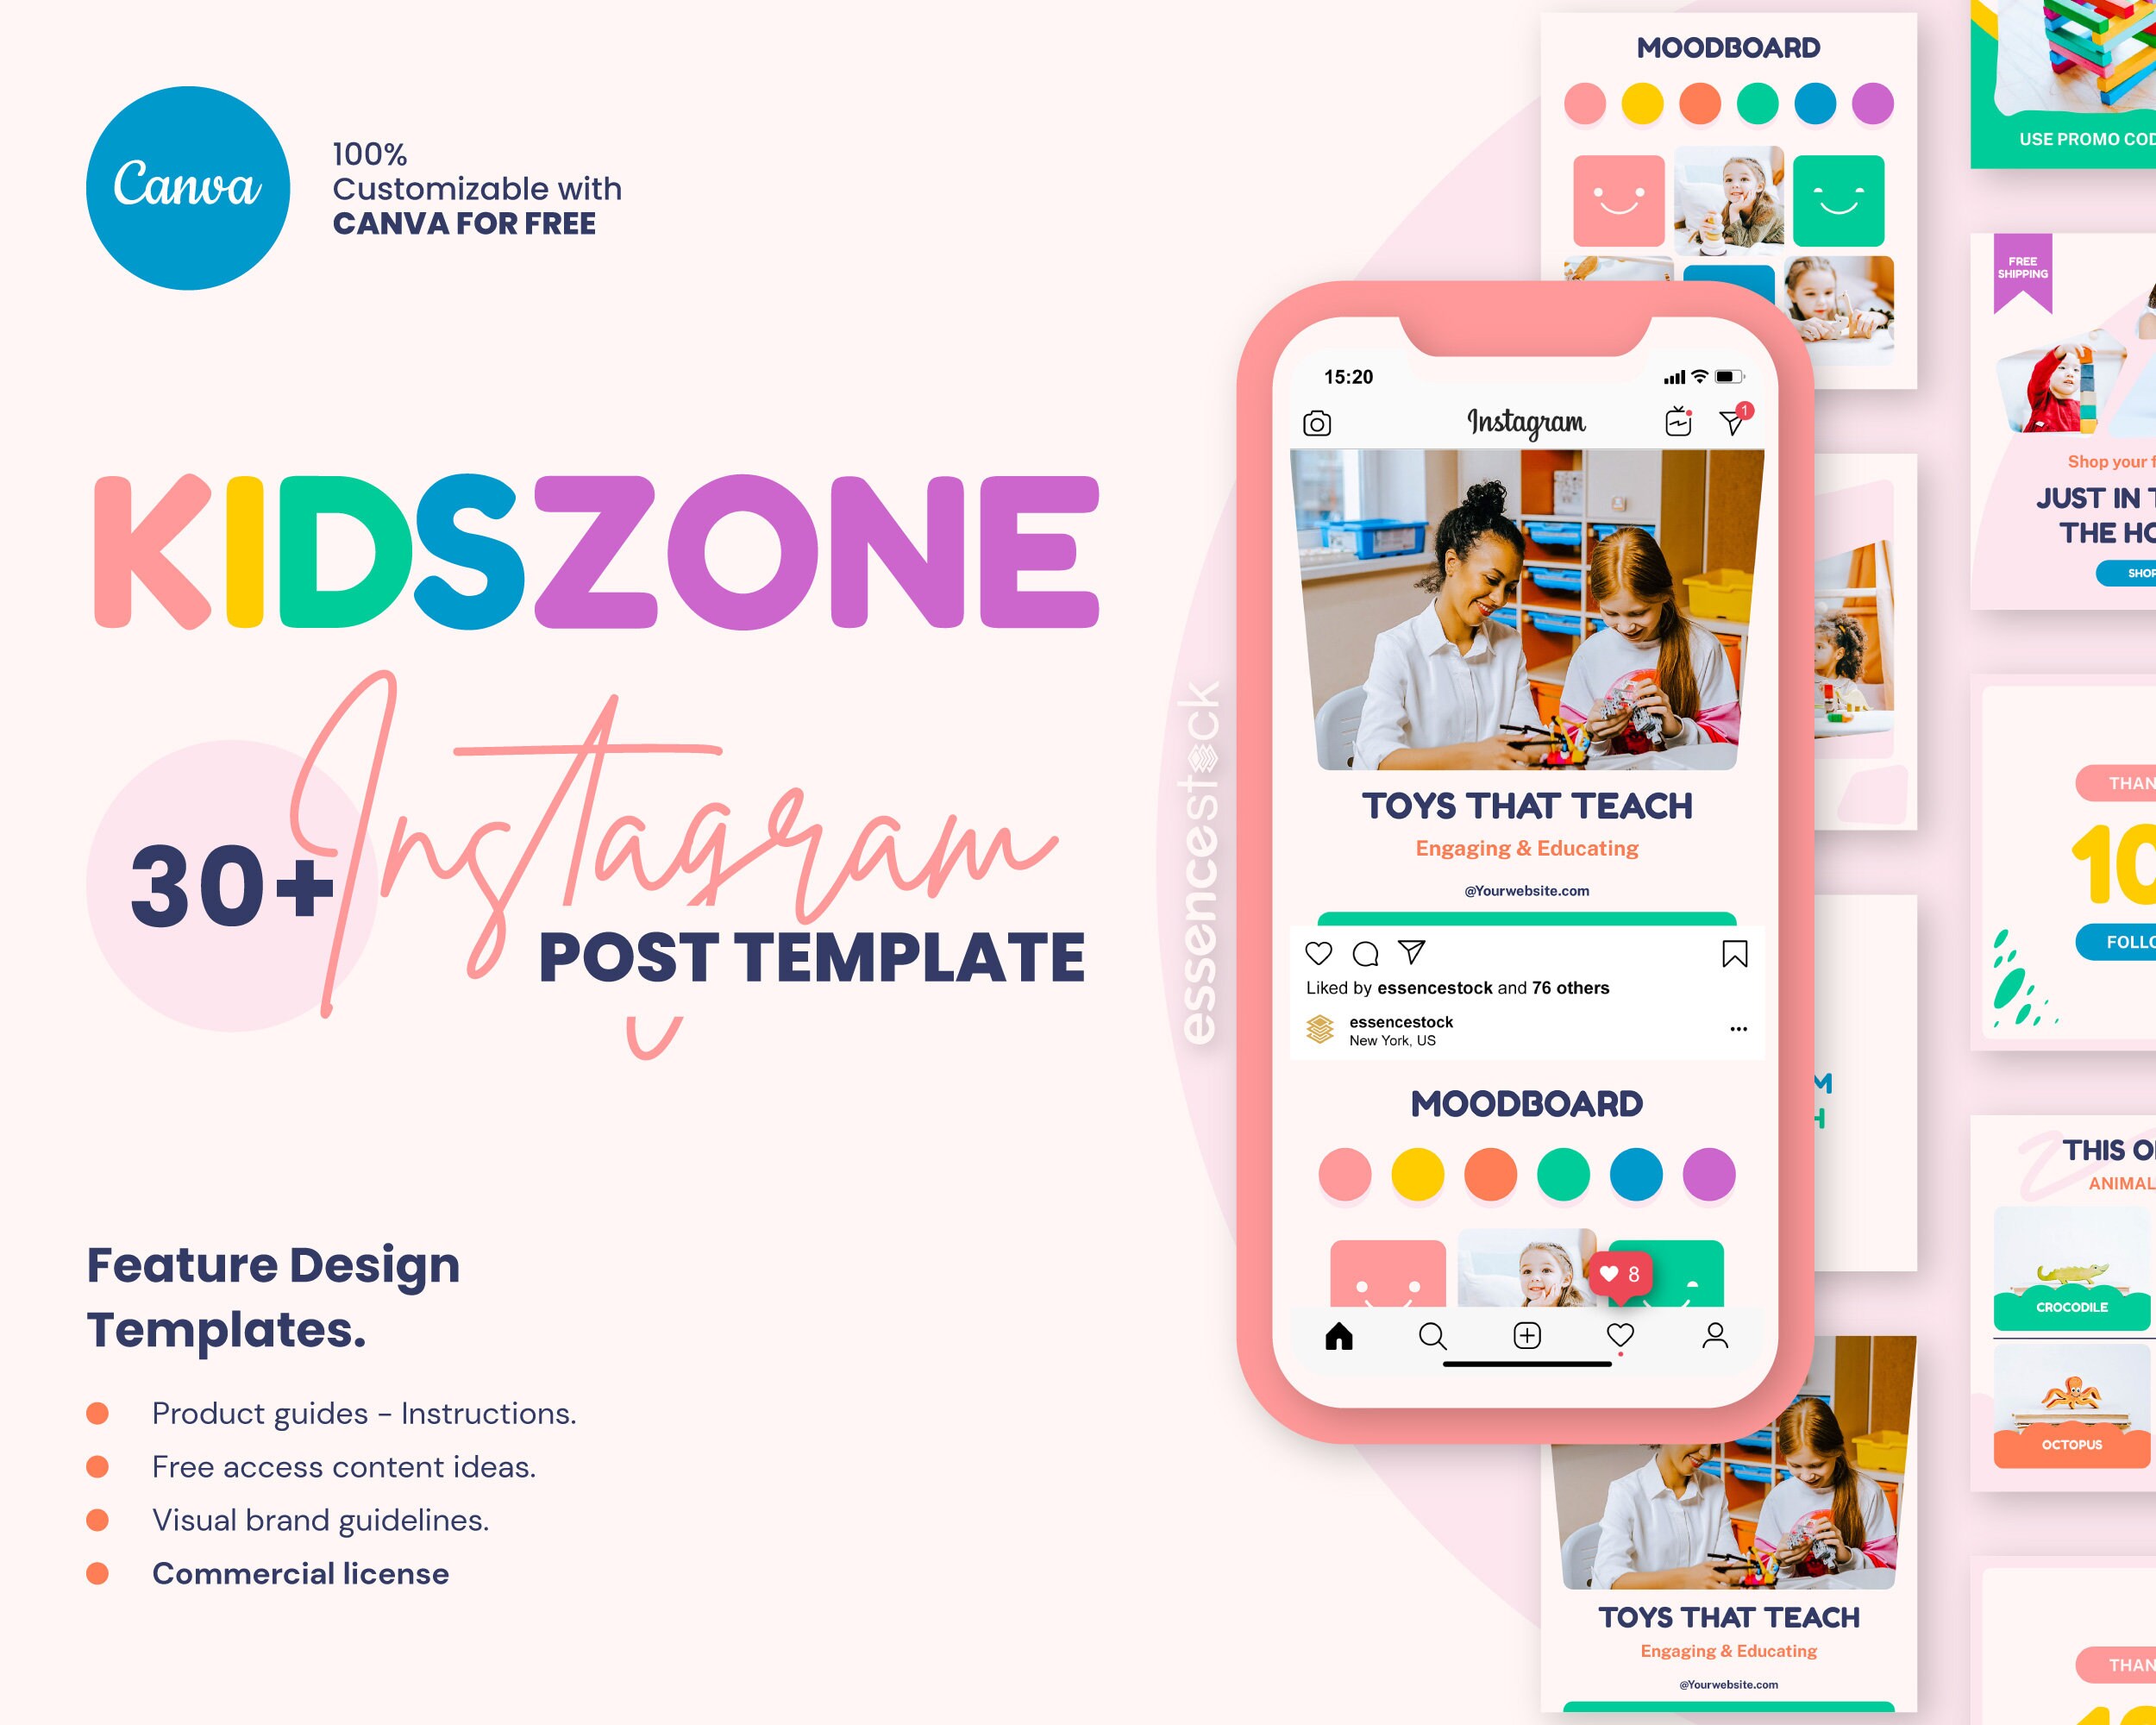 Page 20 - Free and customizable kids templates